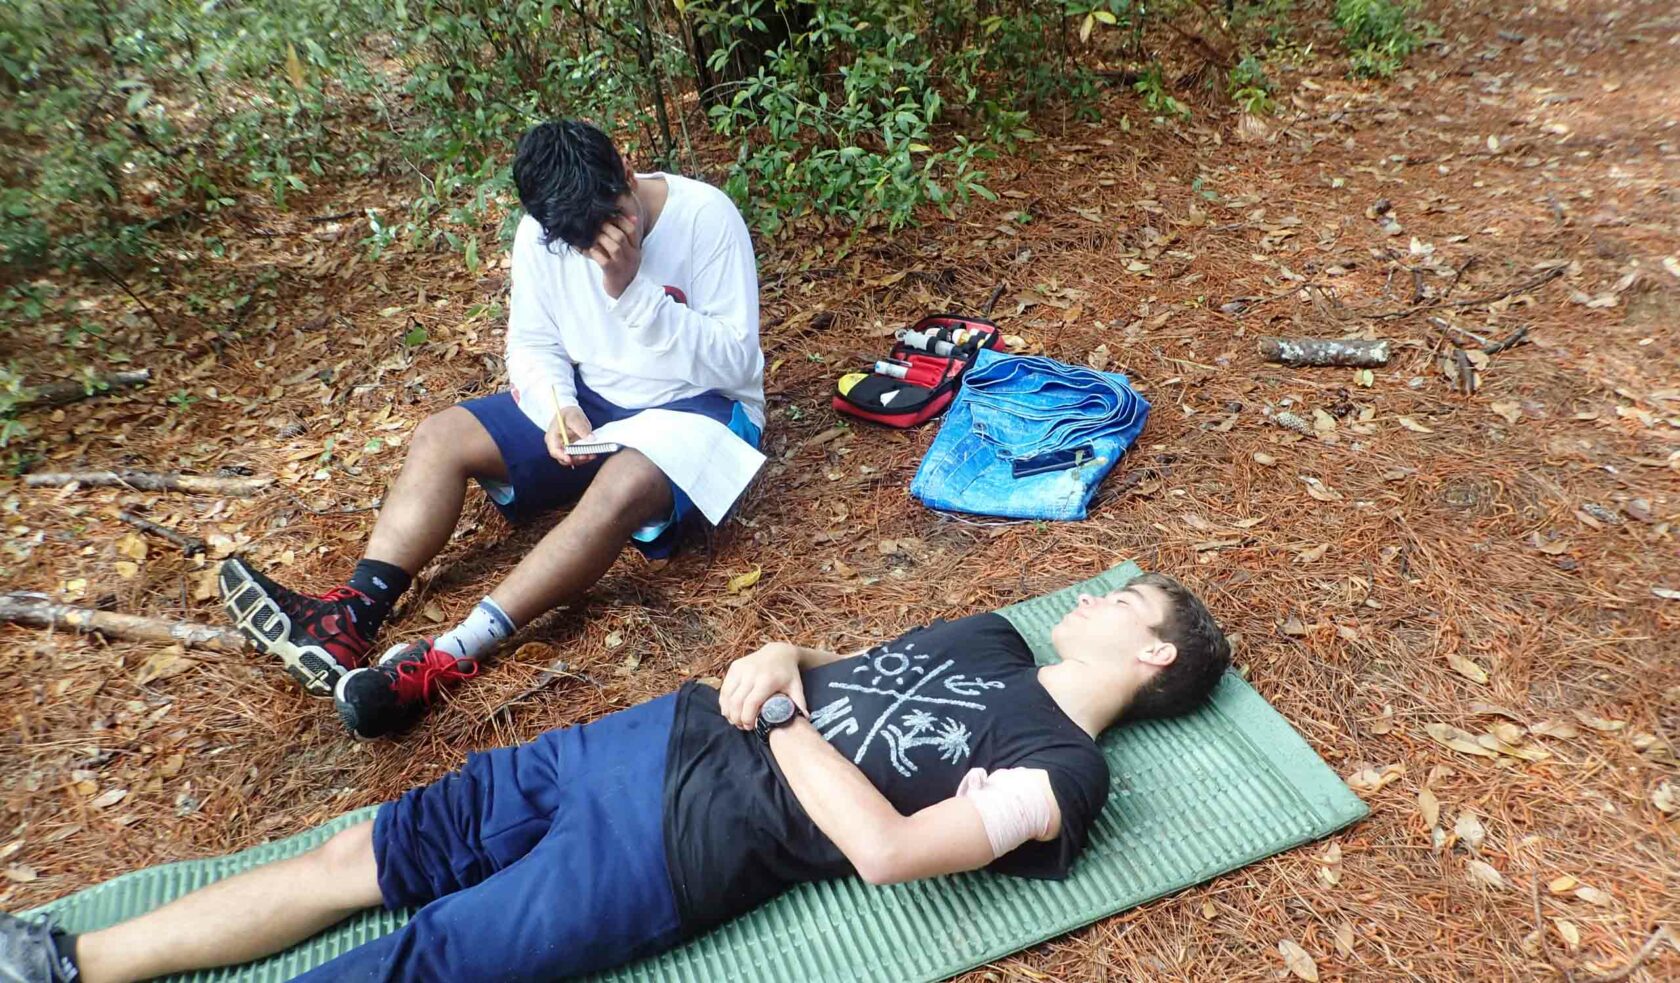 A wilderness EMT student examining a patient.